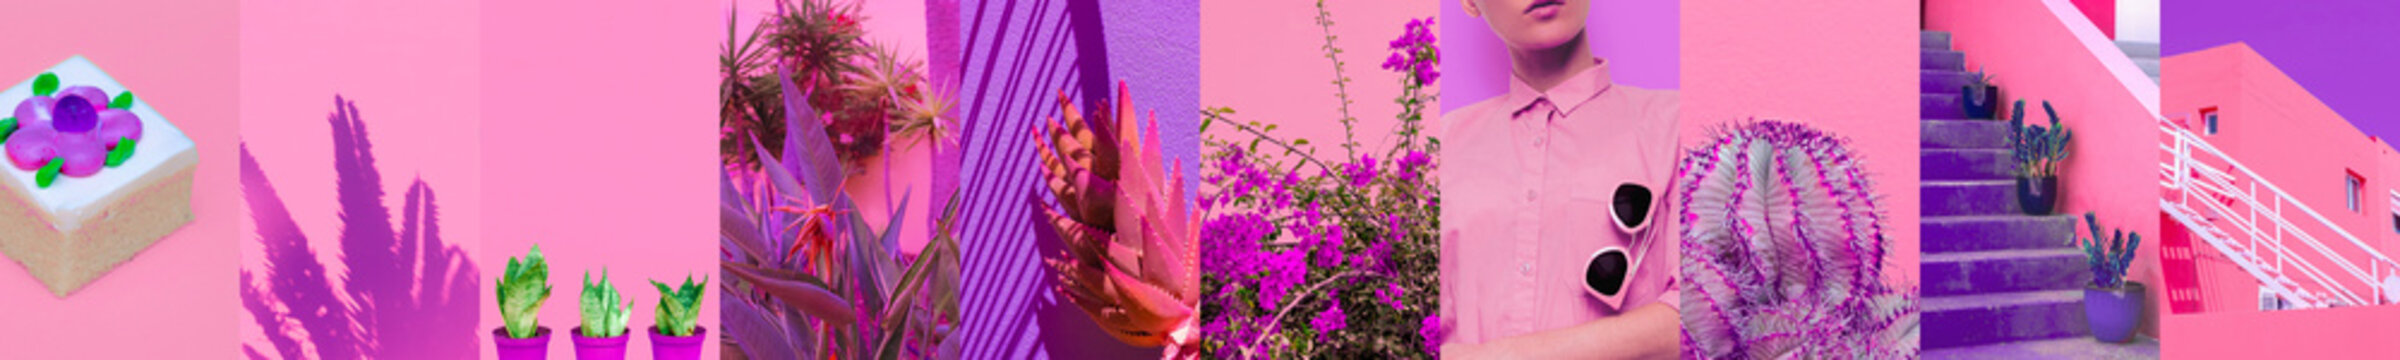 Set of trendy aesthetic photo collages. Minimalistic images of top colors. Pink and purple moodboard